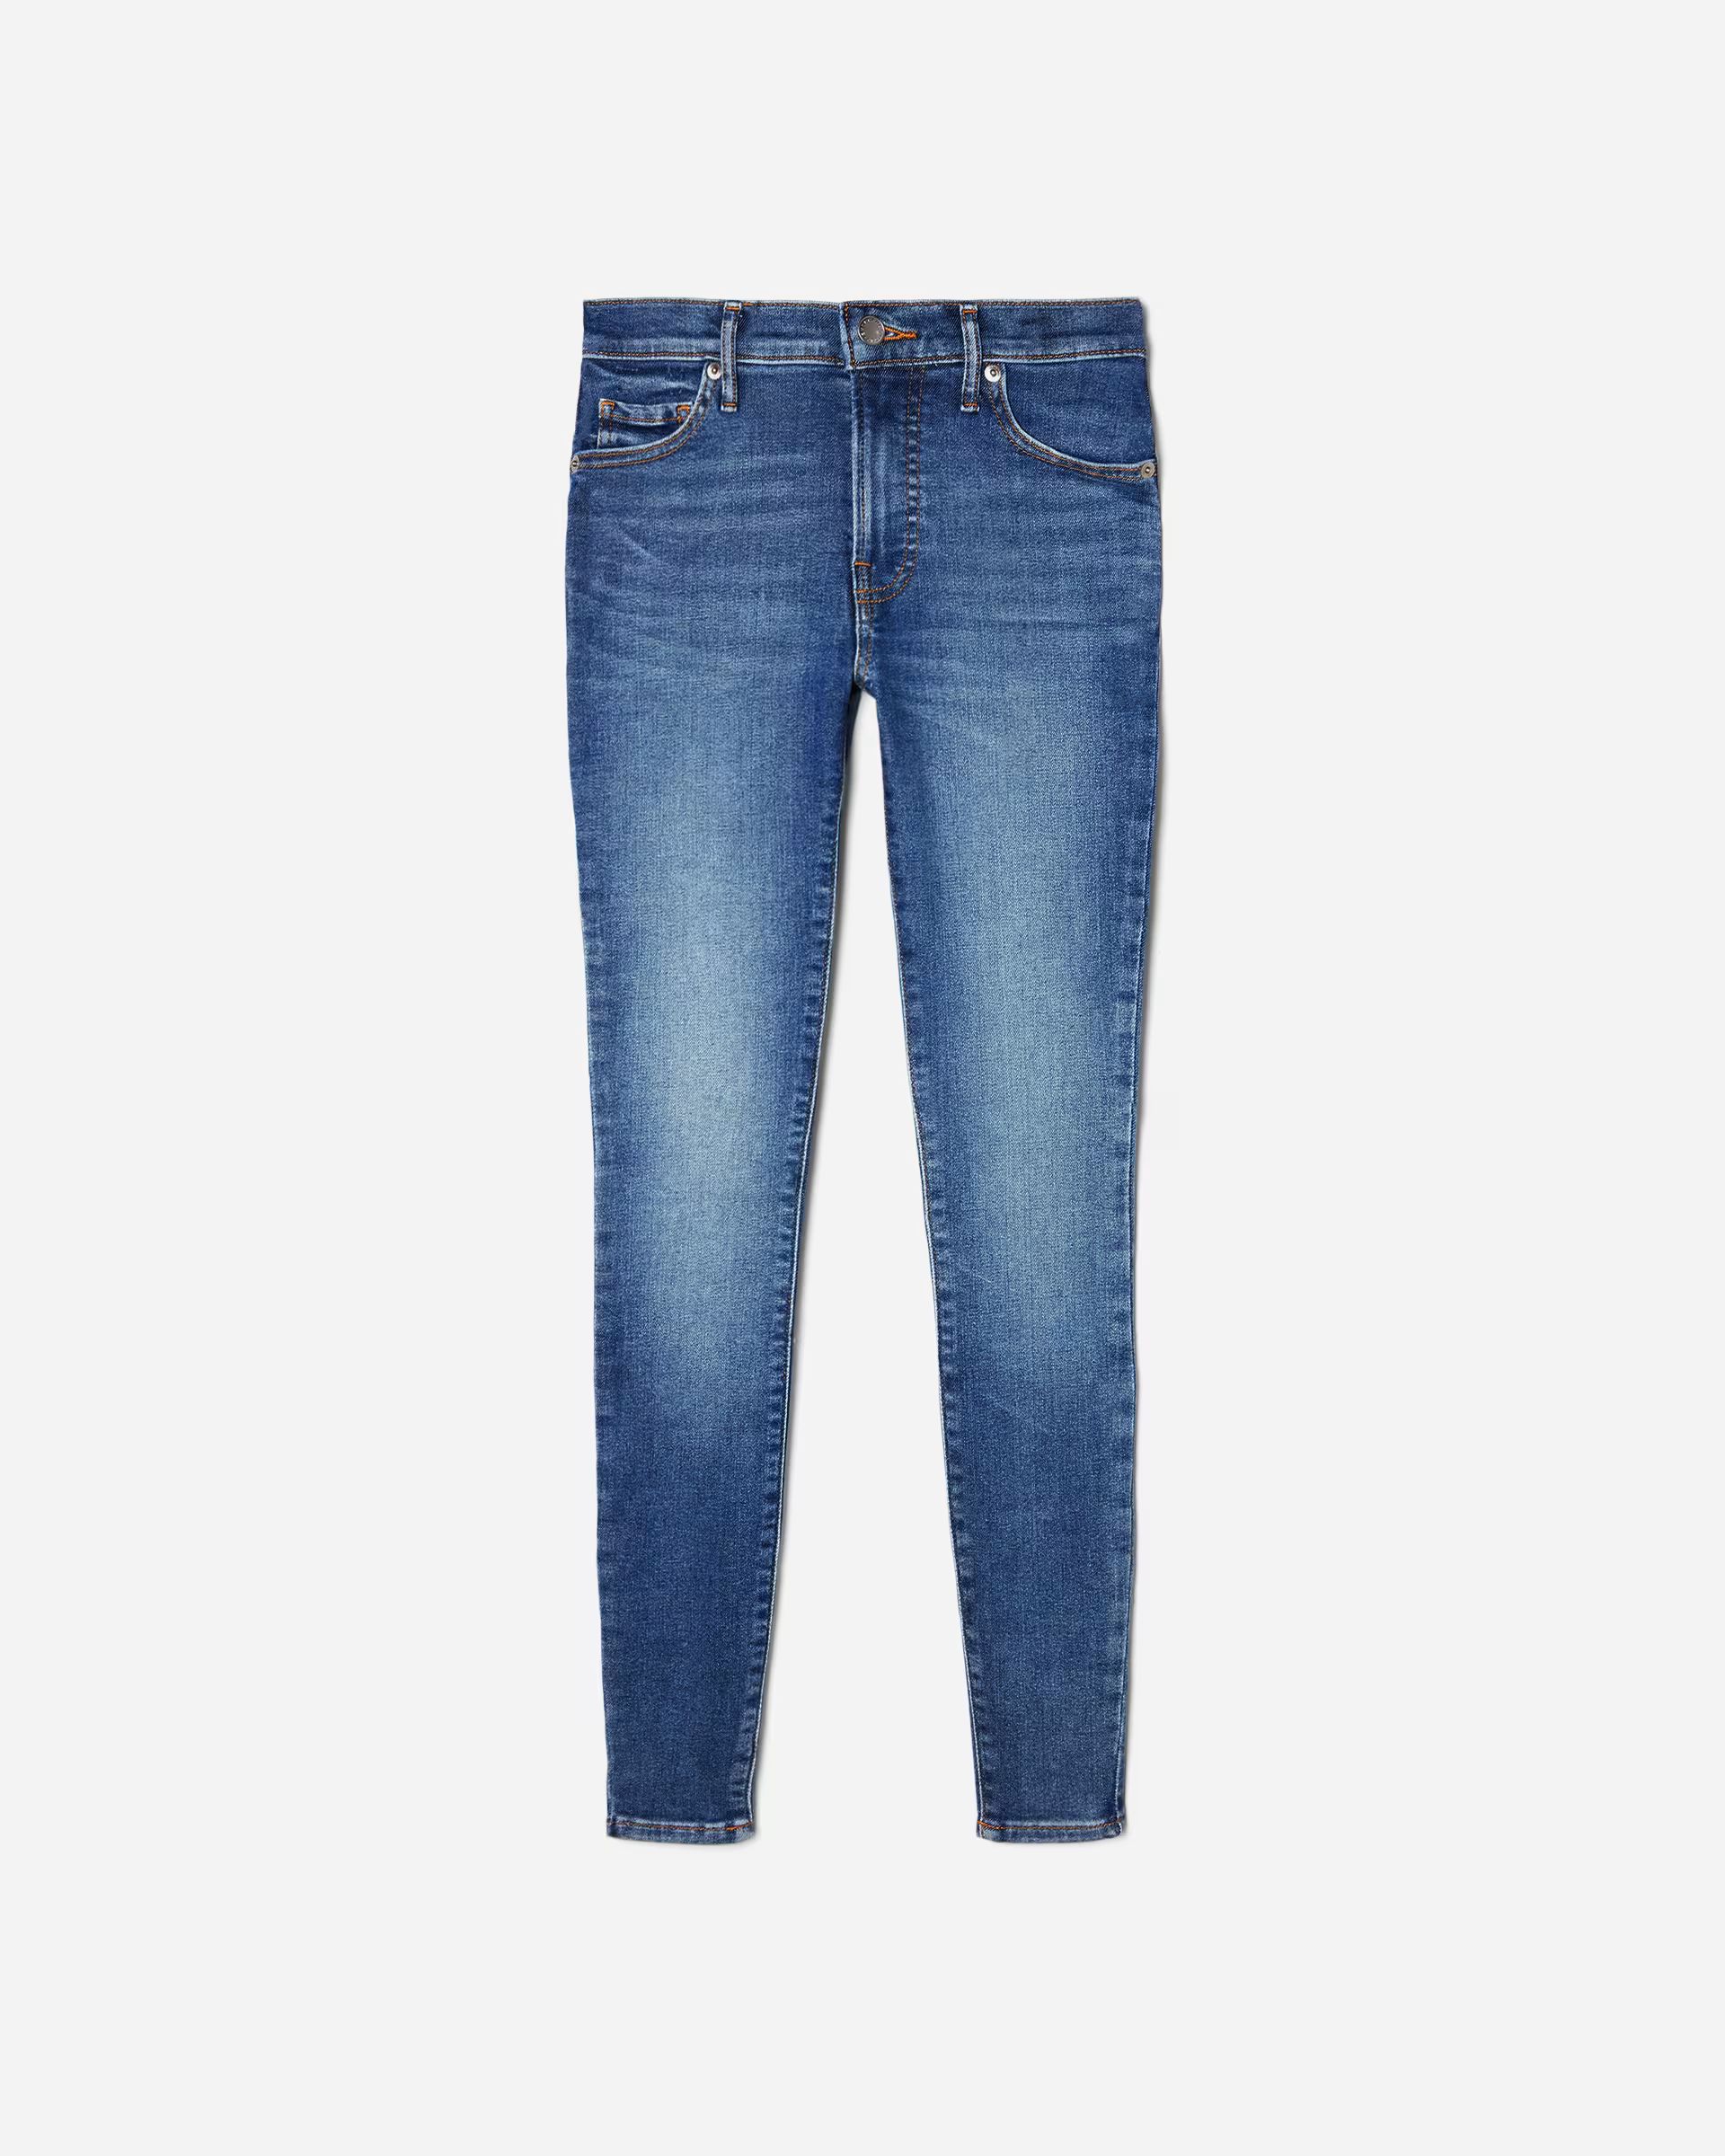 The Mid-Rise Skinny Stretch Jean | Everlane